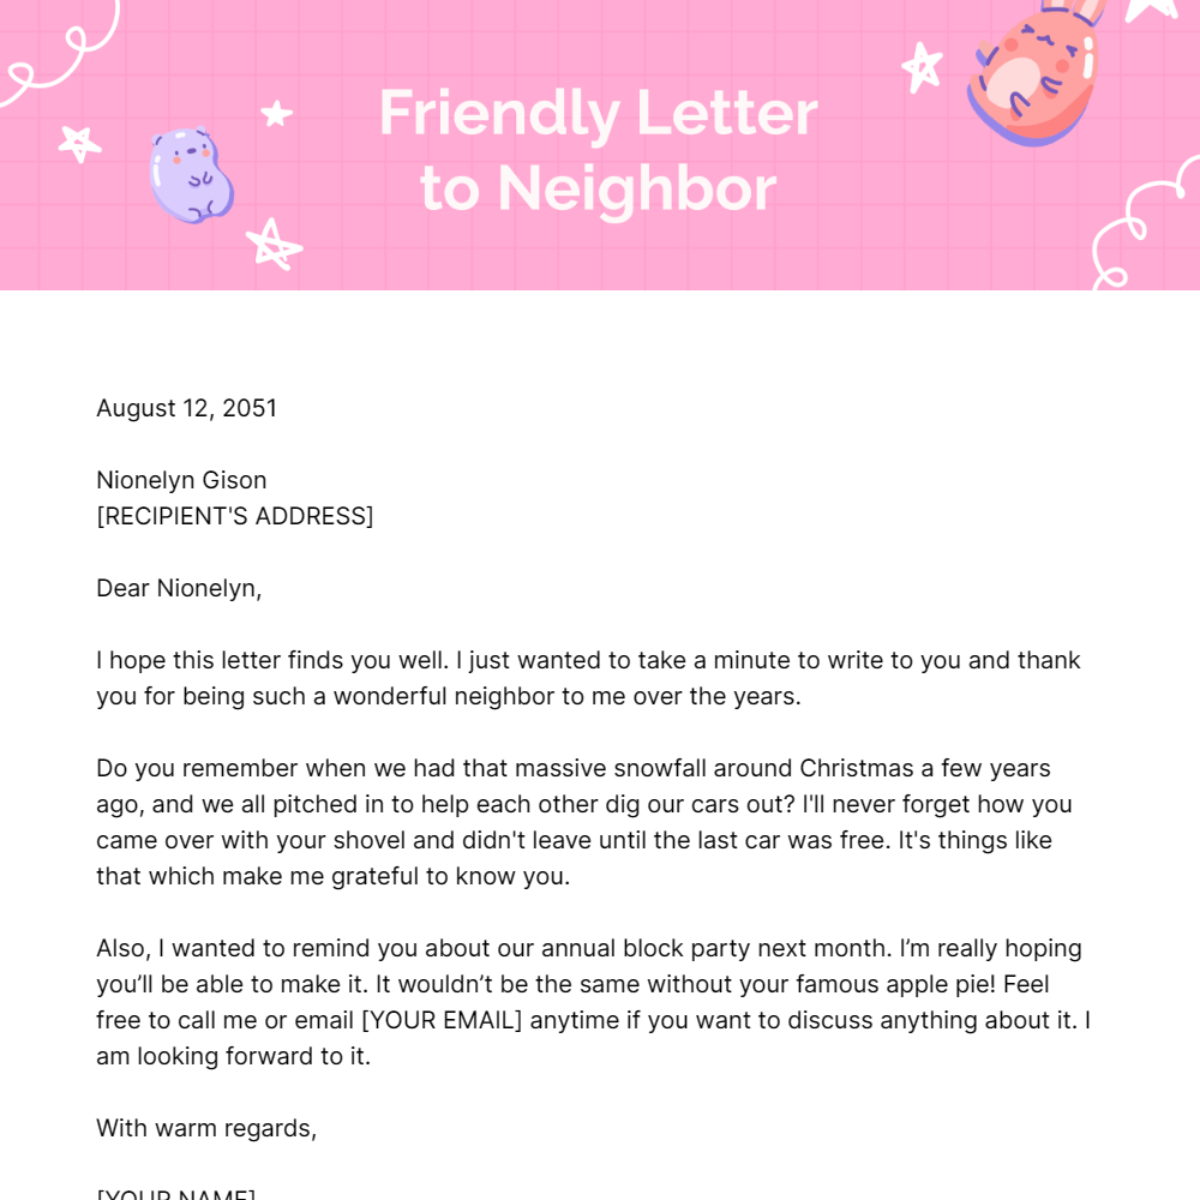 Friendly Letter to Neighbor Template